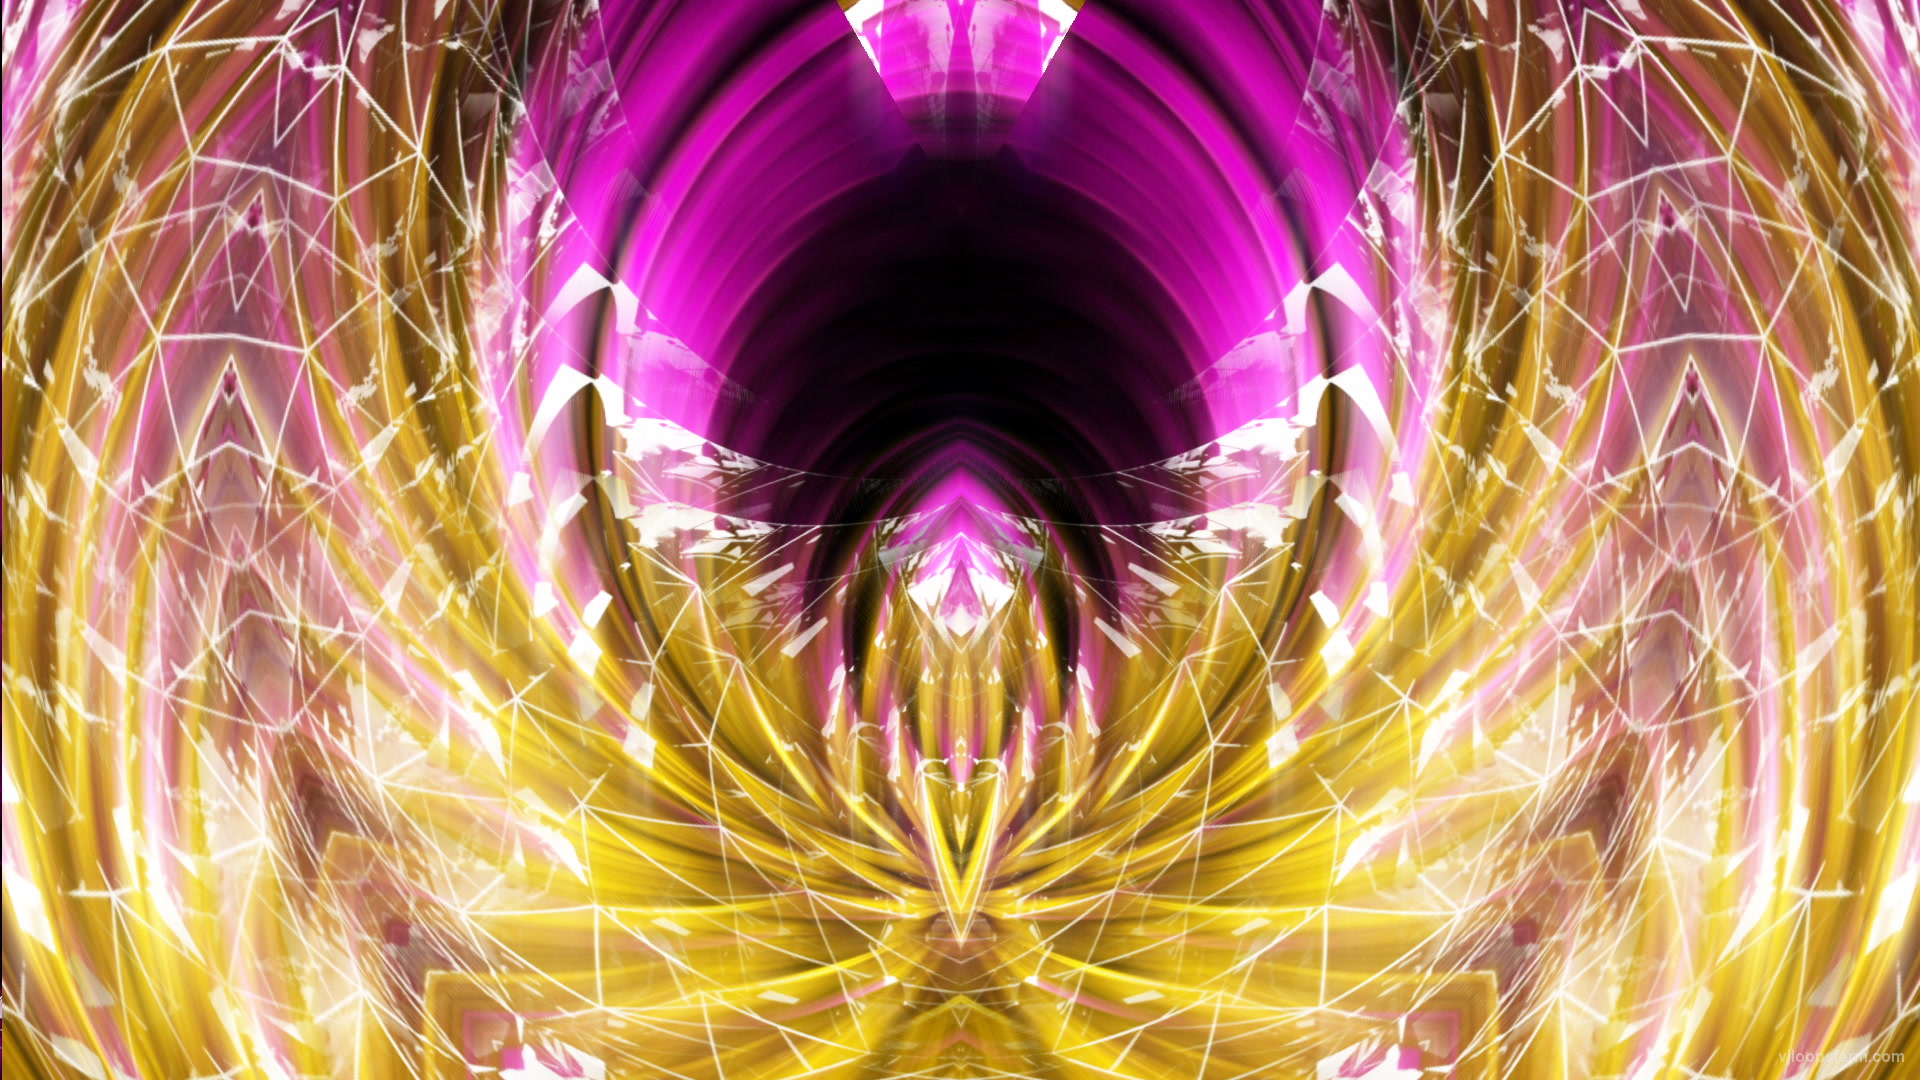 Yellow Wireframe Cyber Egg with Pink Rays Effect Motion Background Video Art VJ Loop